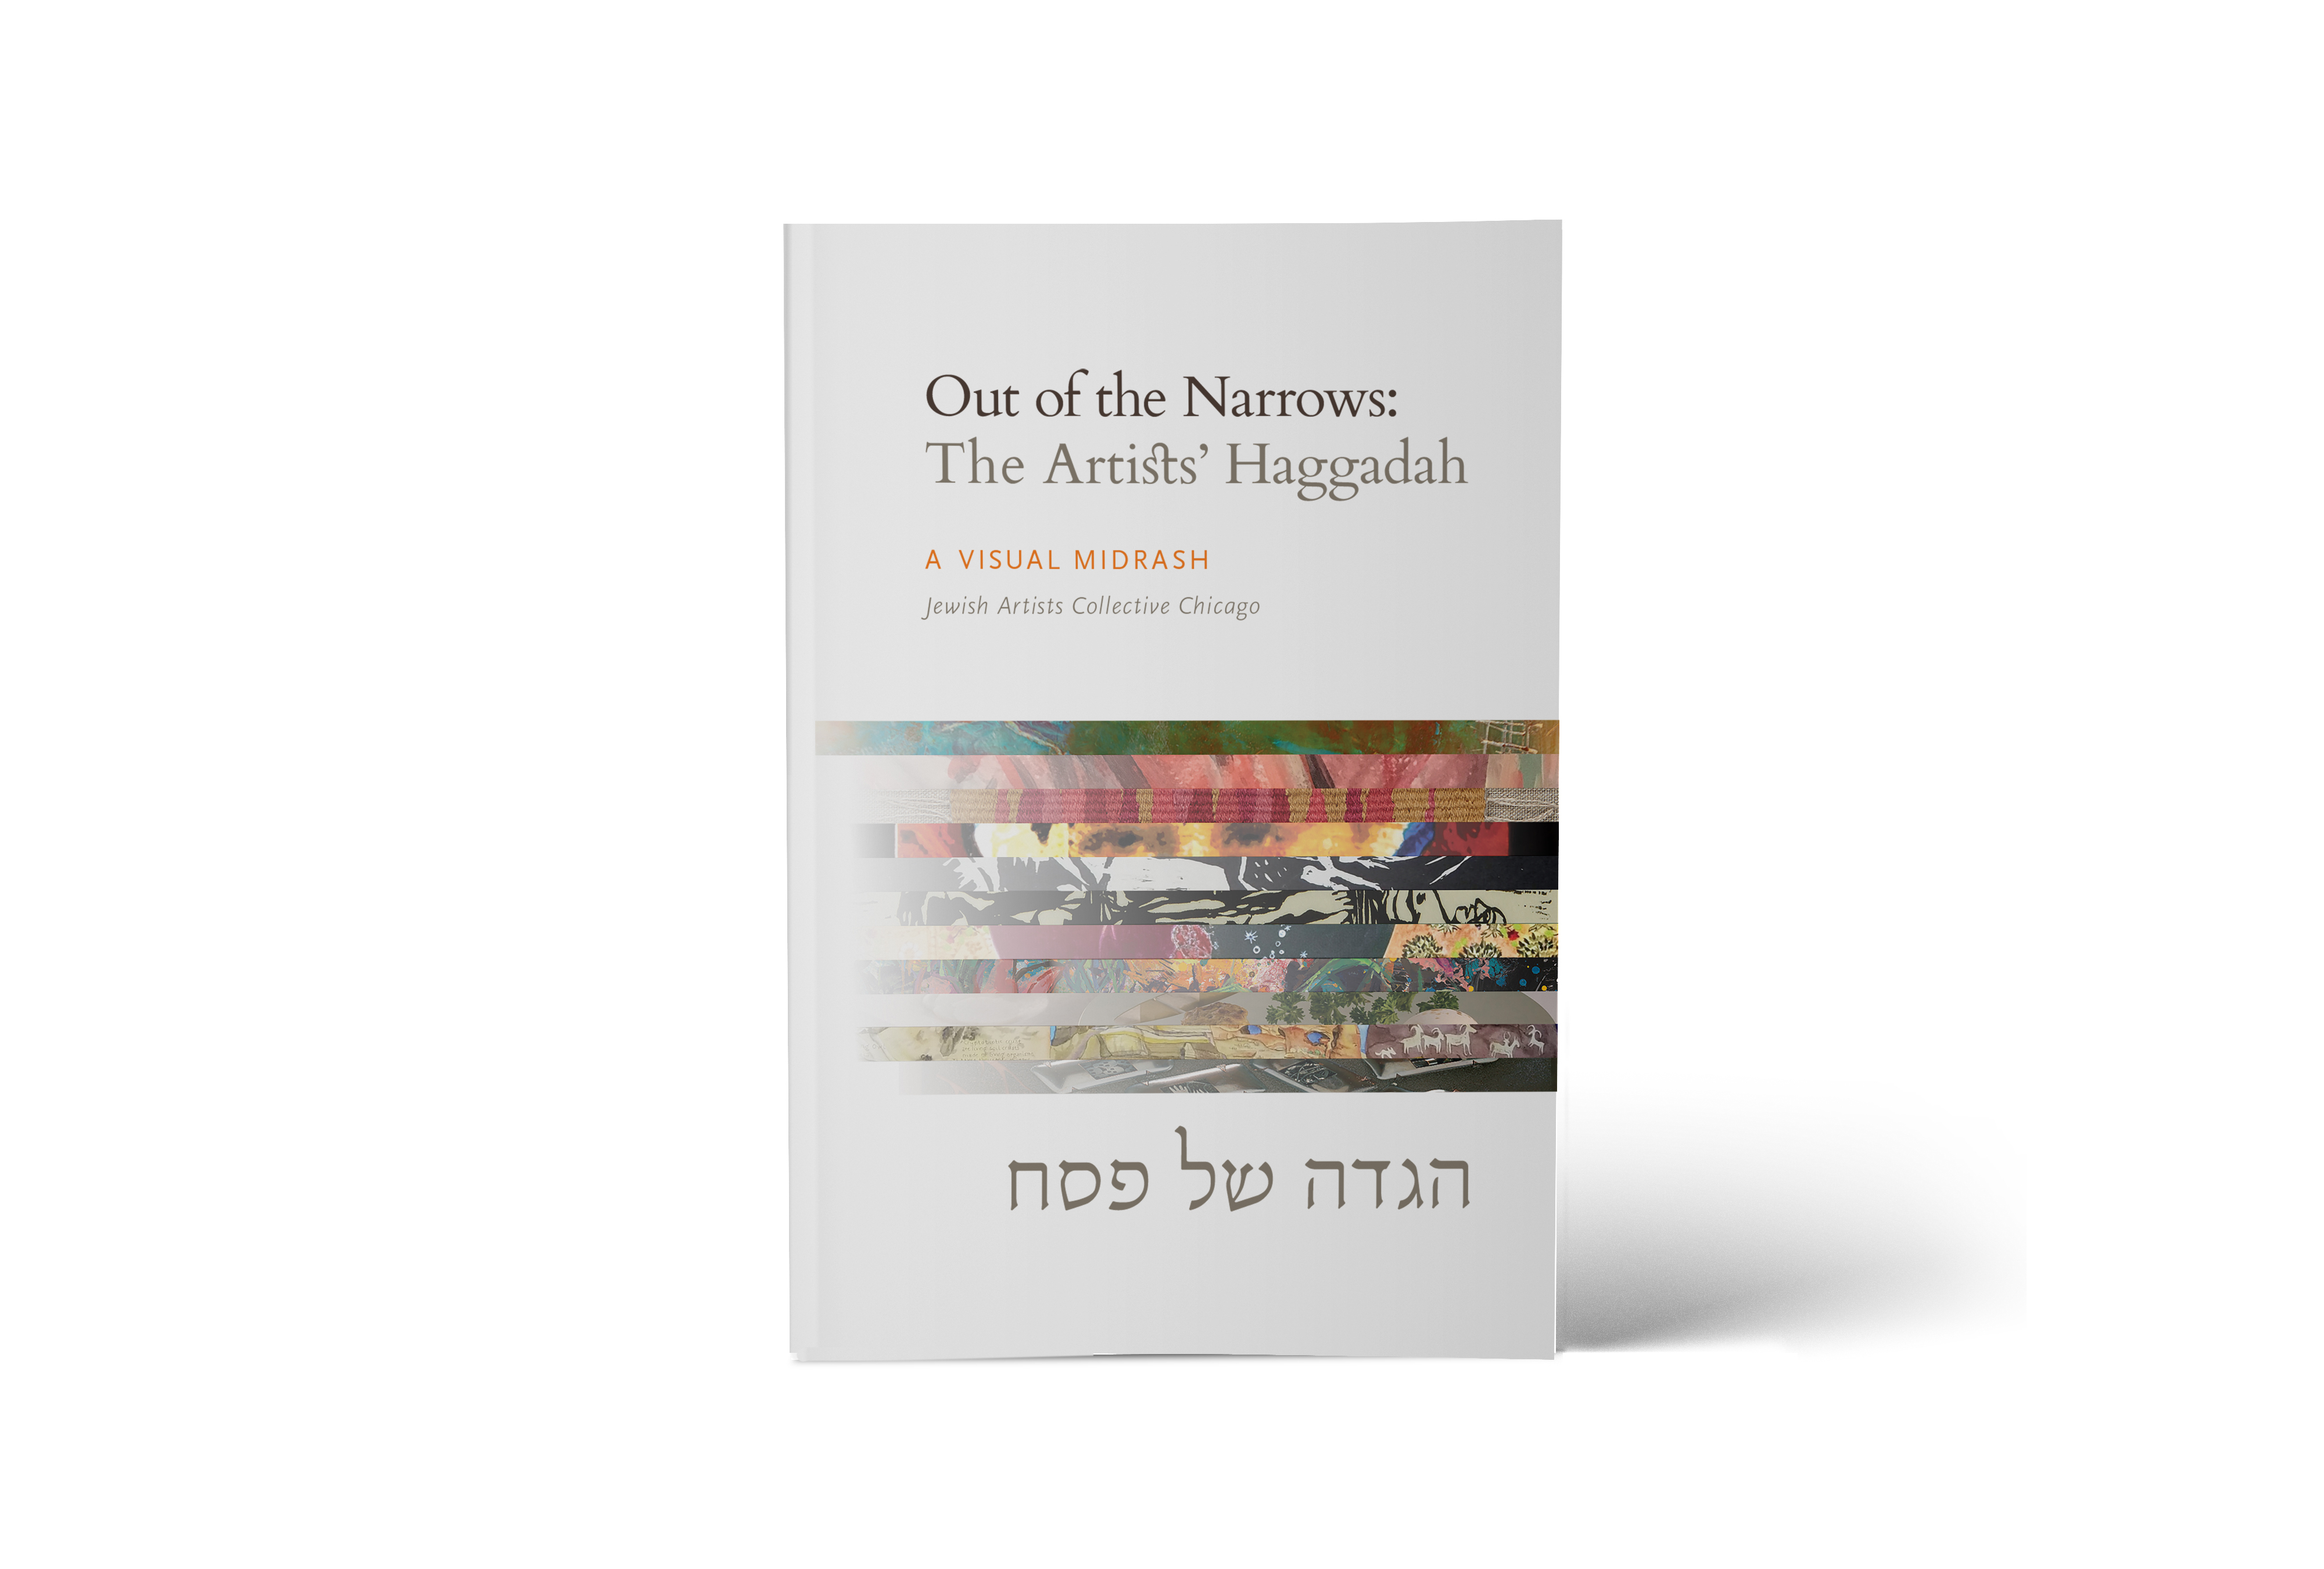 Out of the Narrows: The Artists’ Haggadah Featured at the Dr. Bernard Heller Museum in New York